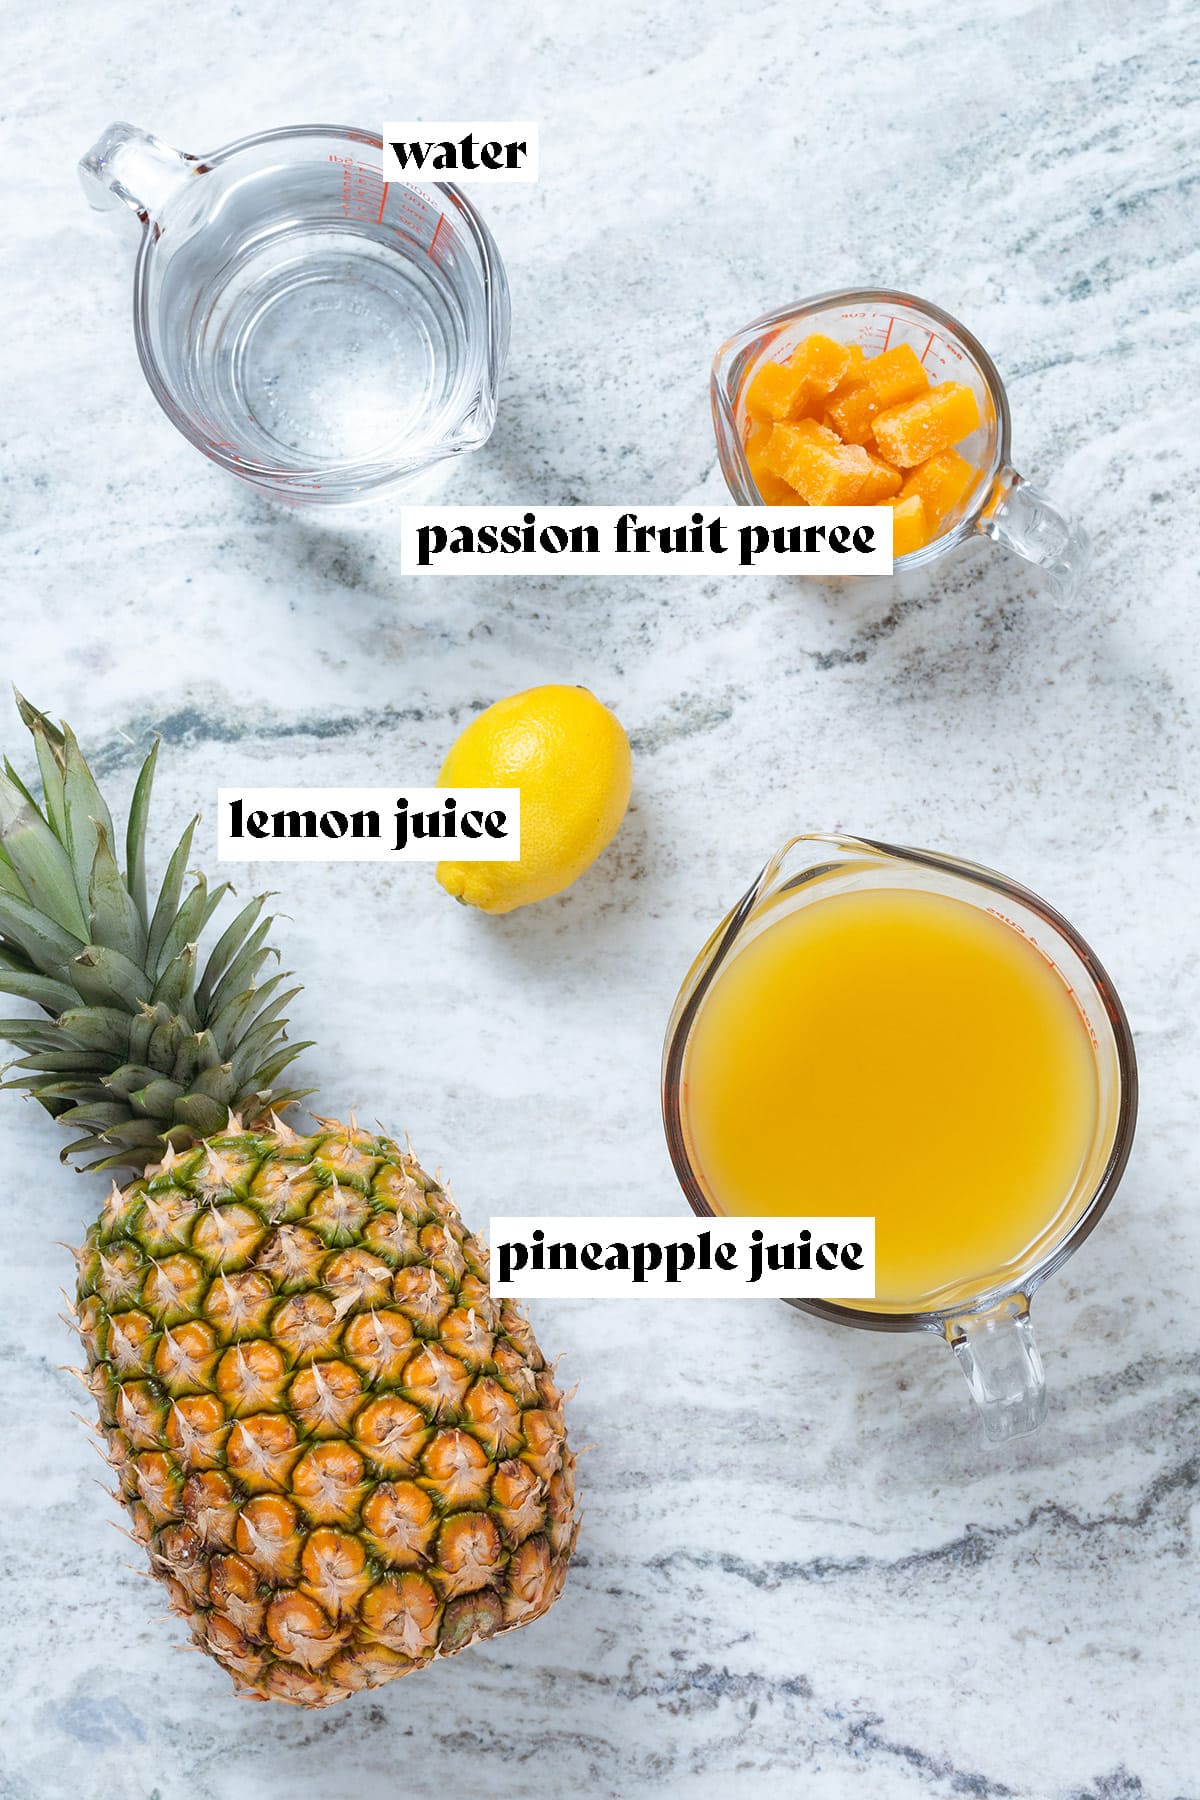 Ingredients like pineapple juice, lemon, and passion fruit puree laid out on a stone background with text overlay.